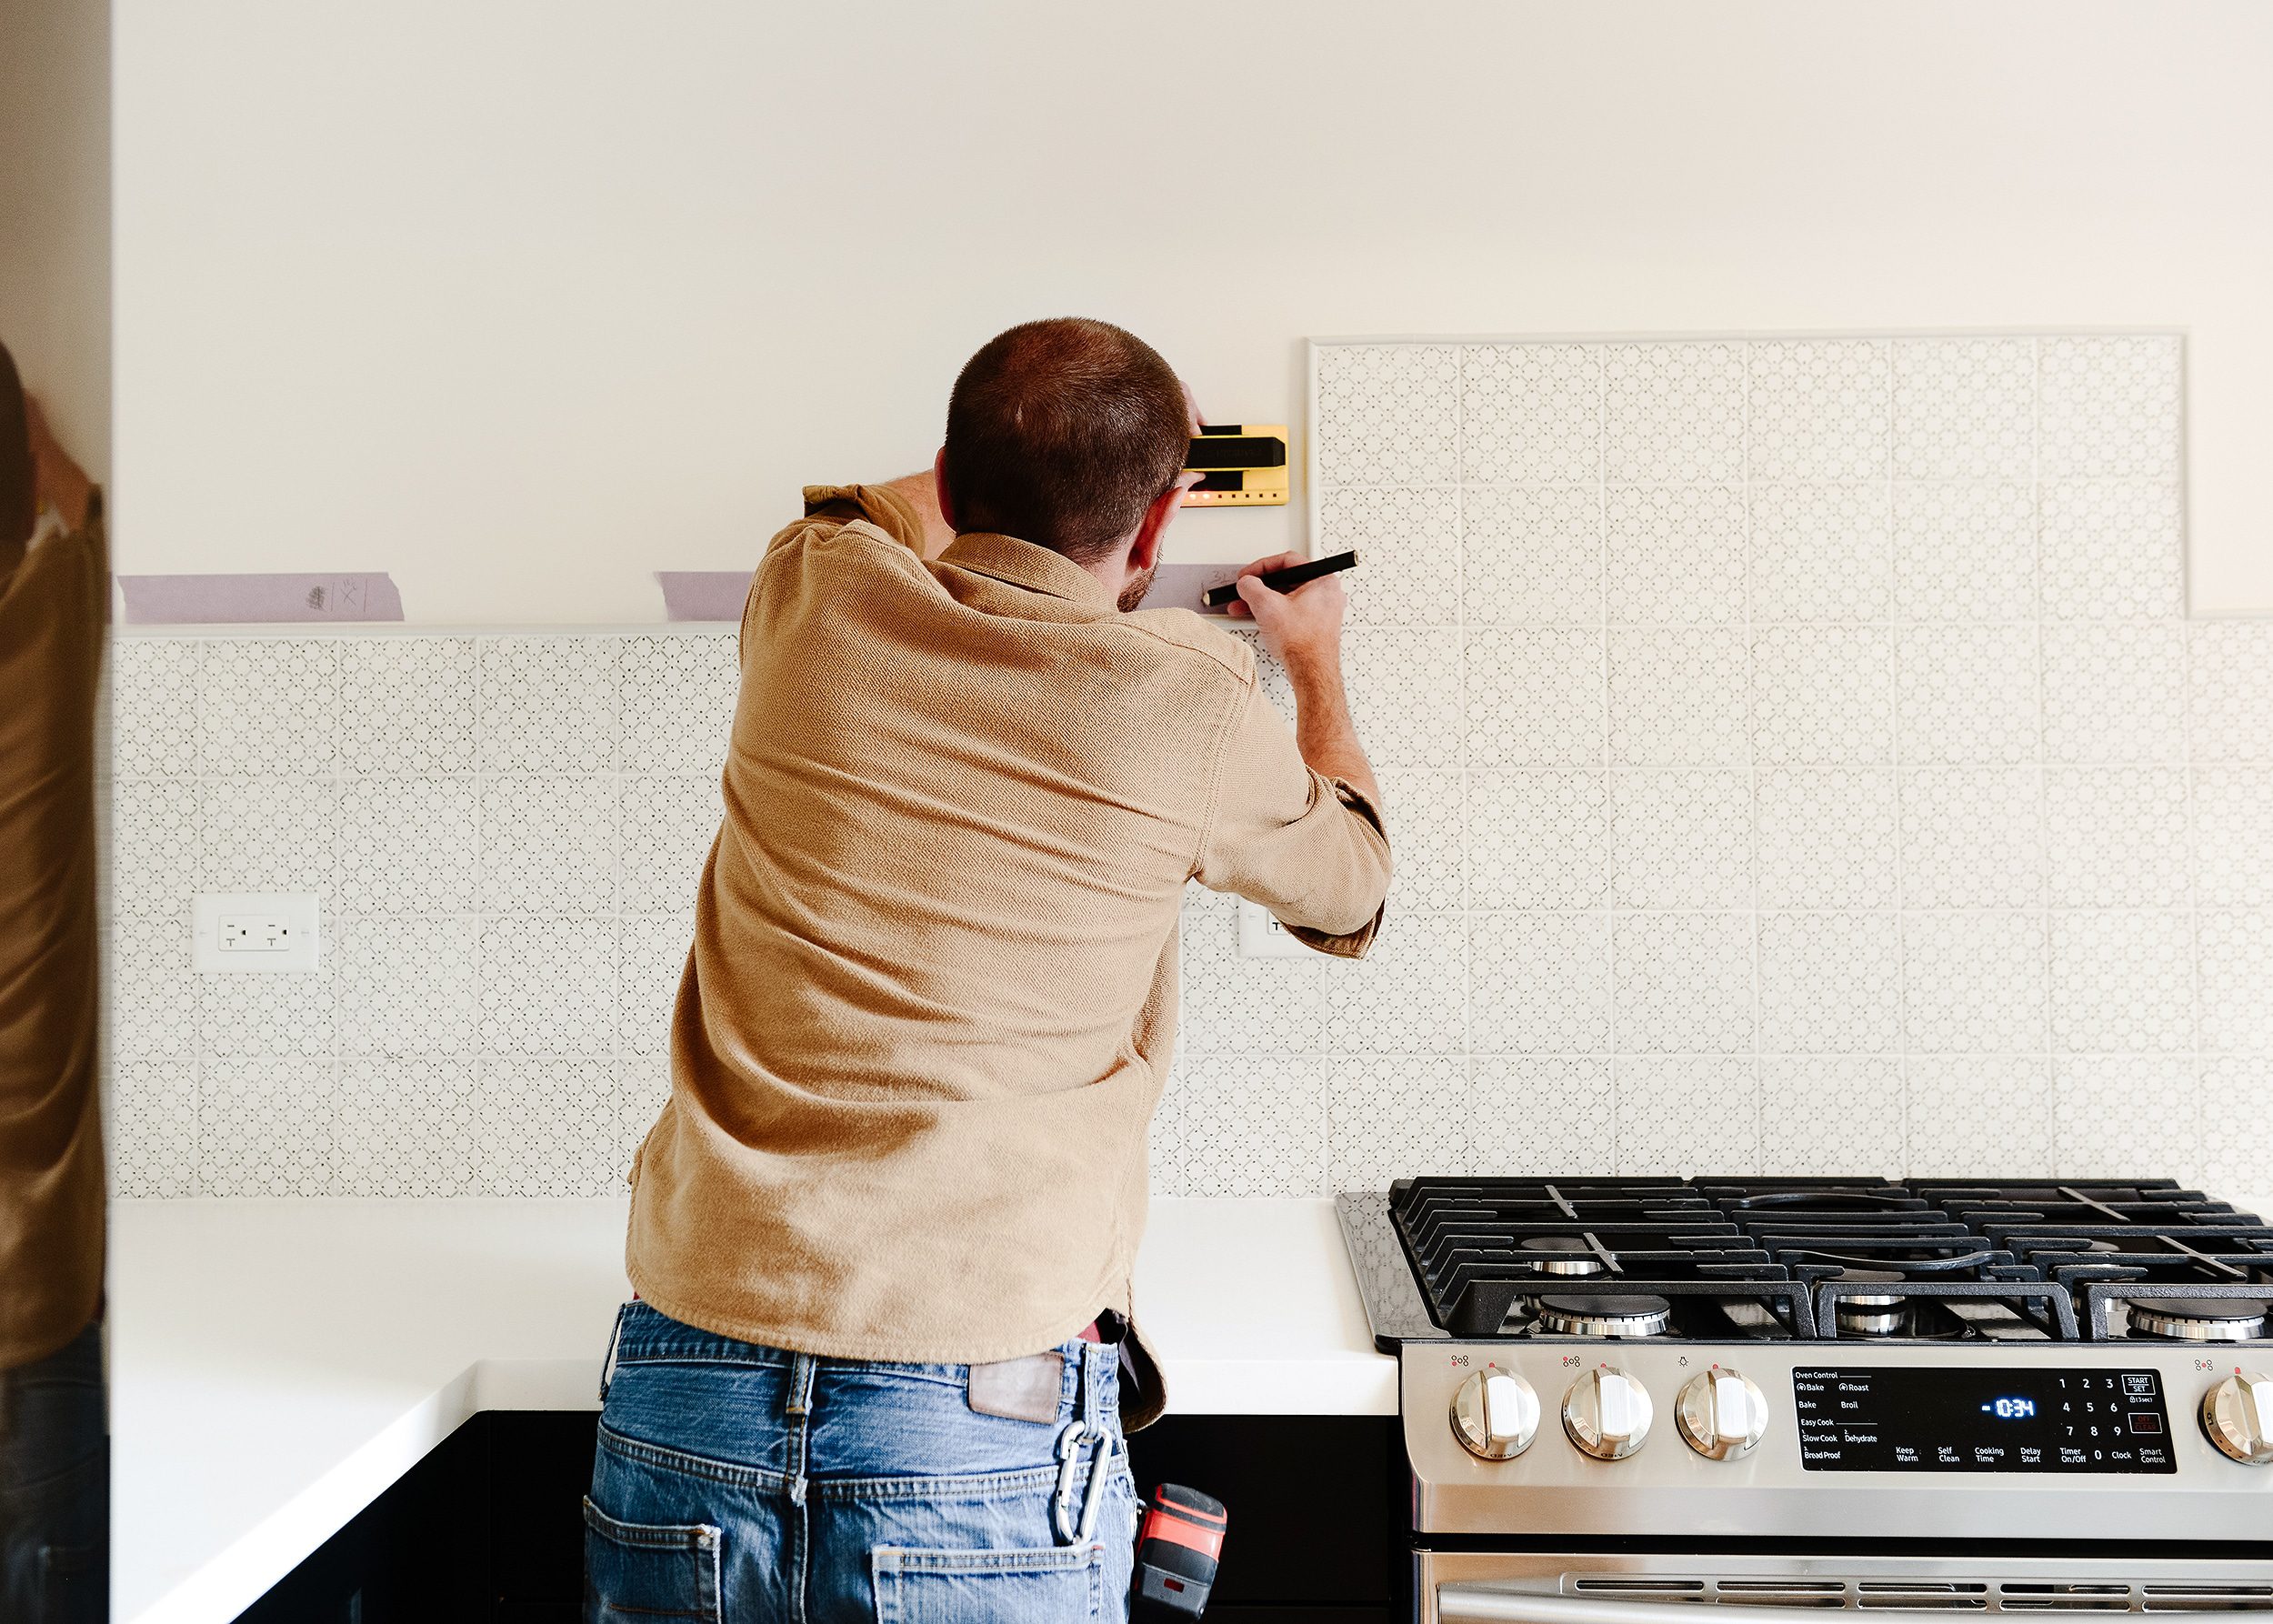 Marking studs in a kitchen to prepare for open shelving | via Yellow Brick Home